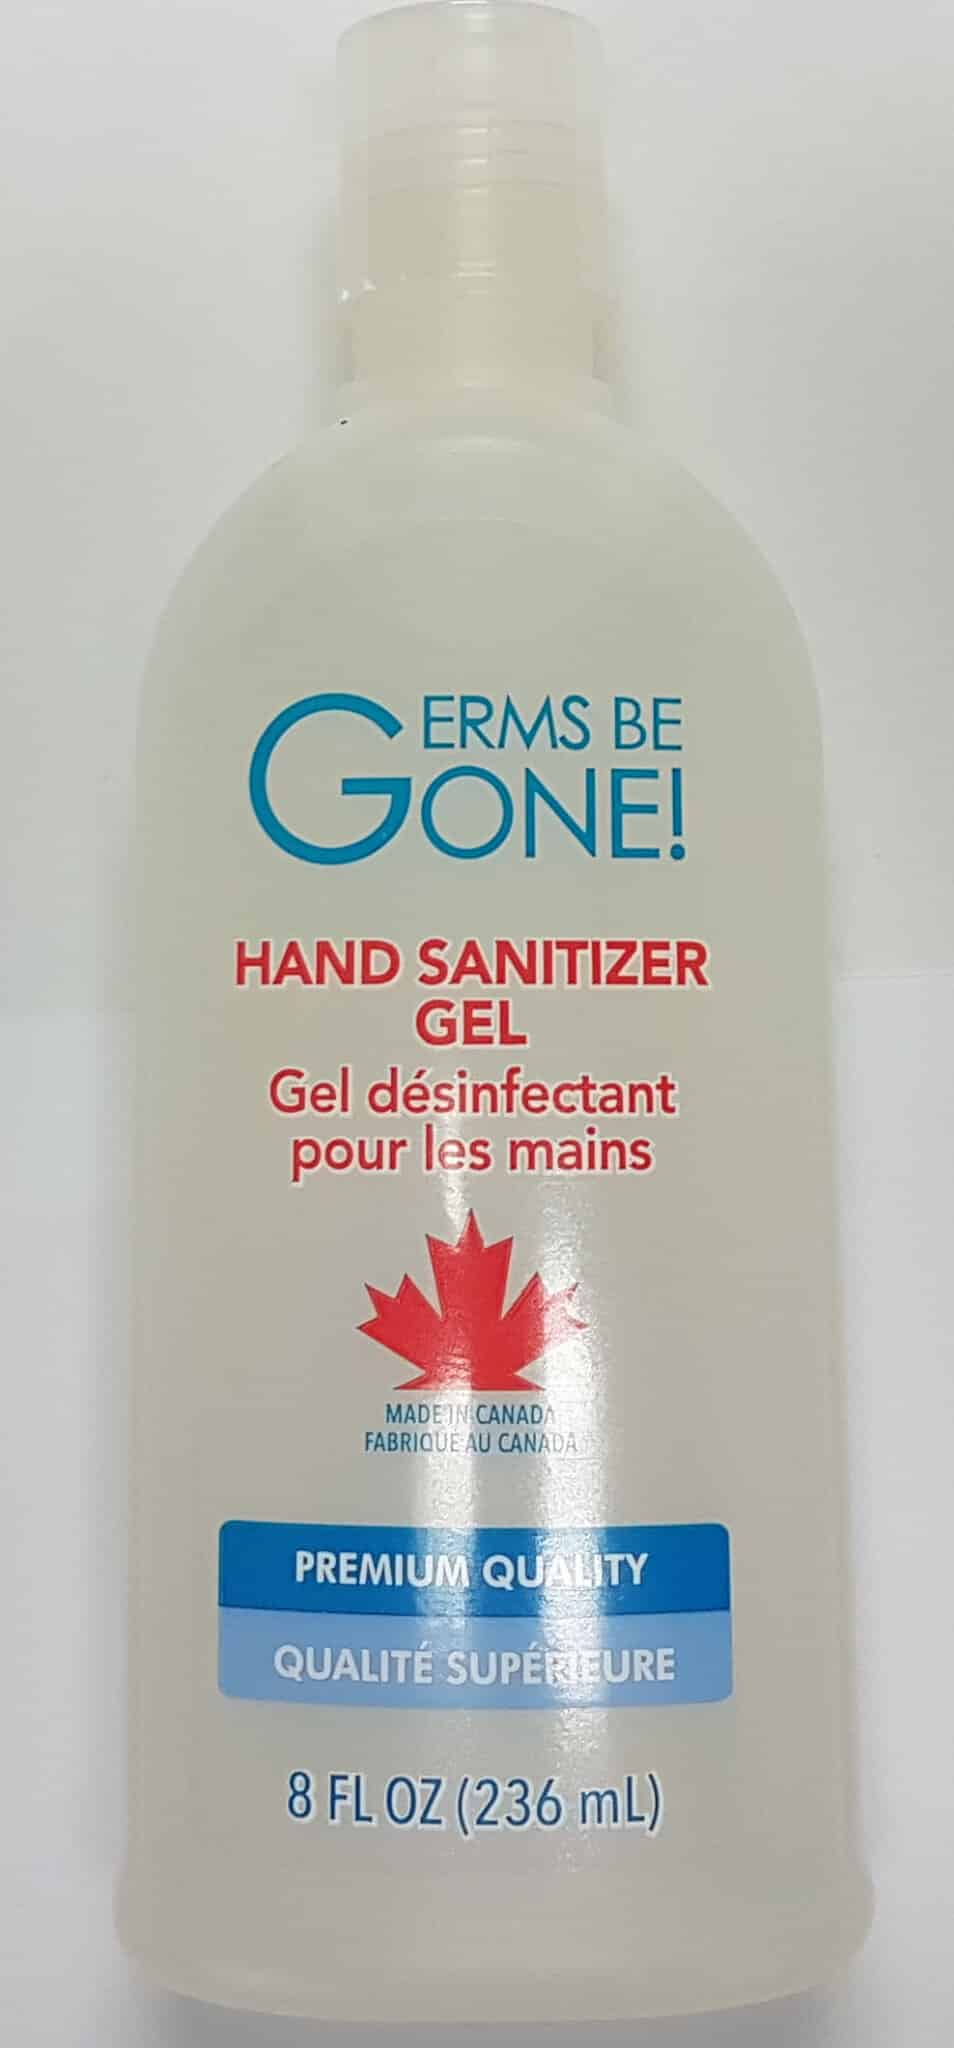 Germs Be Gone Hand Sanitizerv2